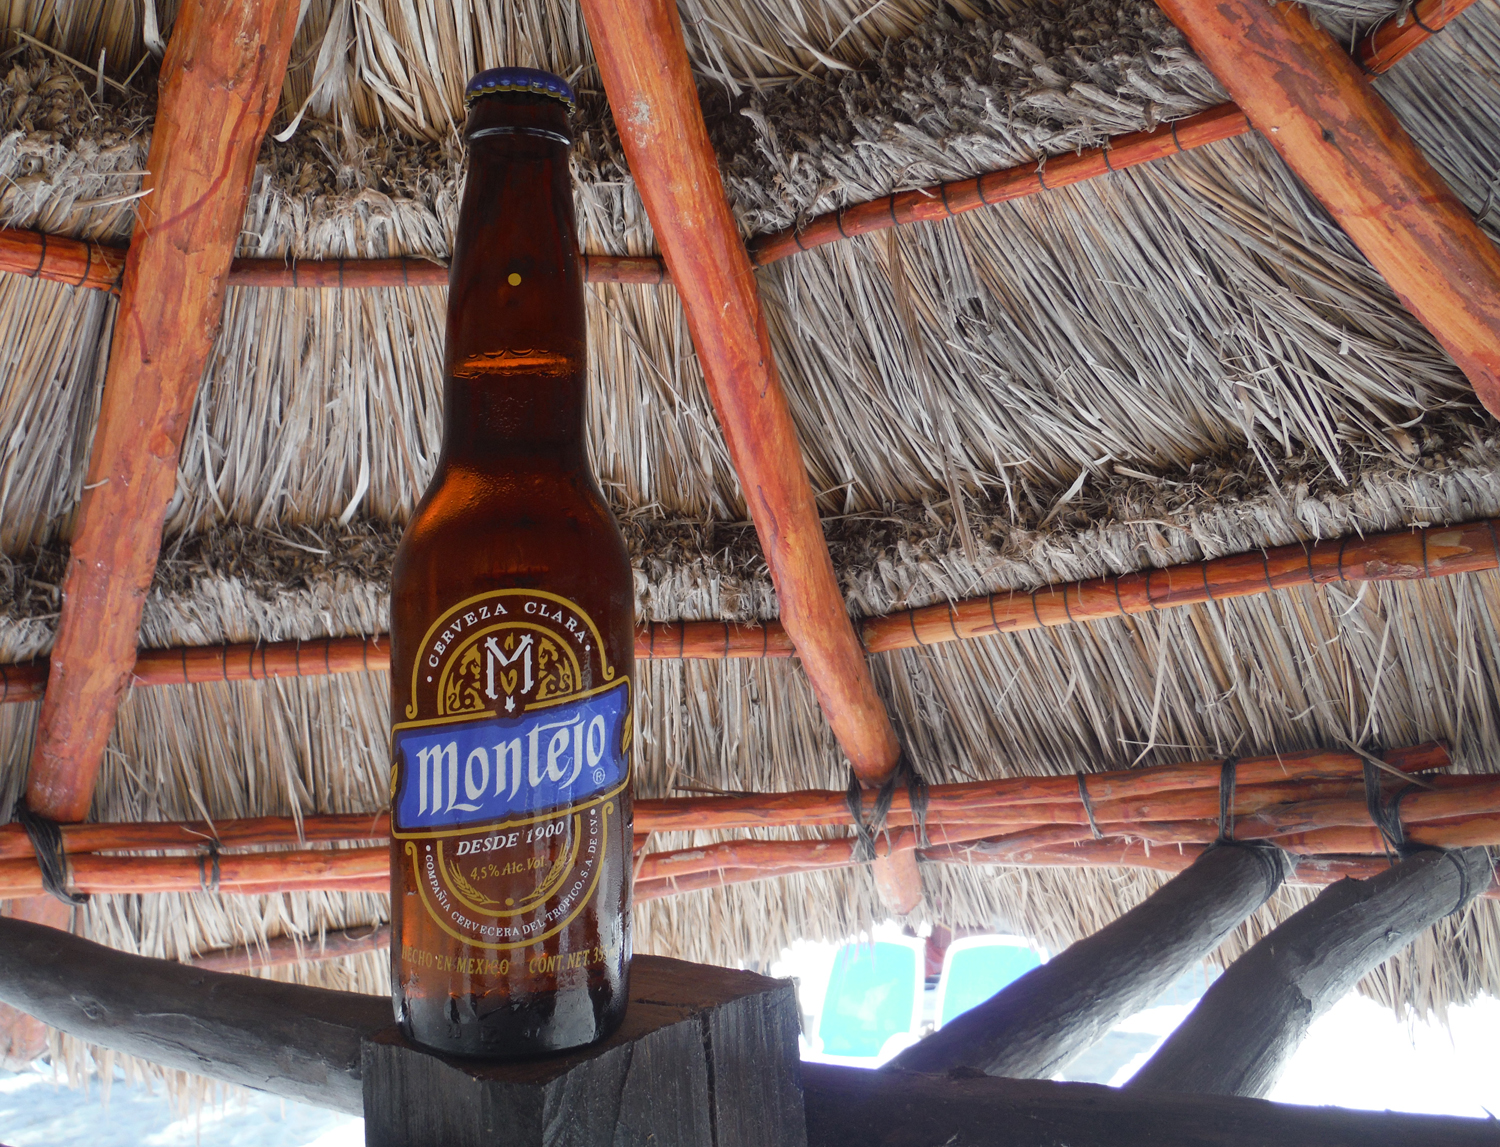 Mexico's Montejo beer is a refreshing lager.